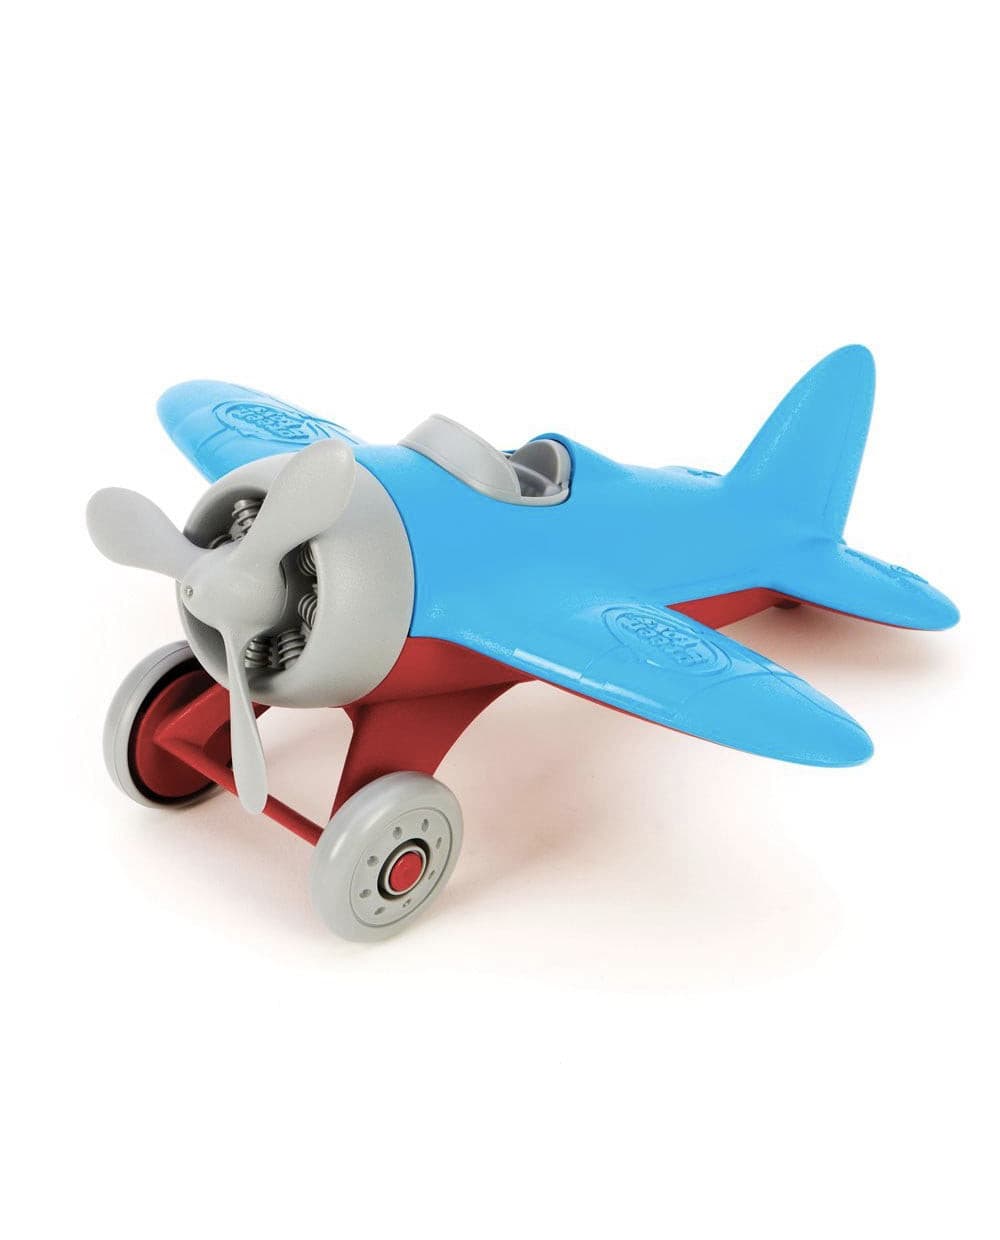 Bigjigs Green Toys Recycled Toys - Aeroplanes